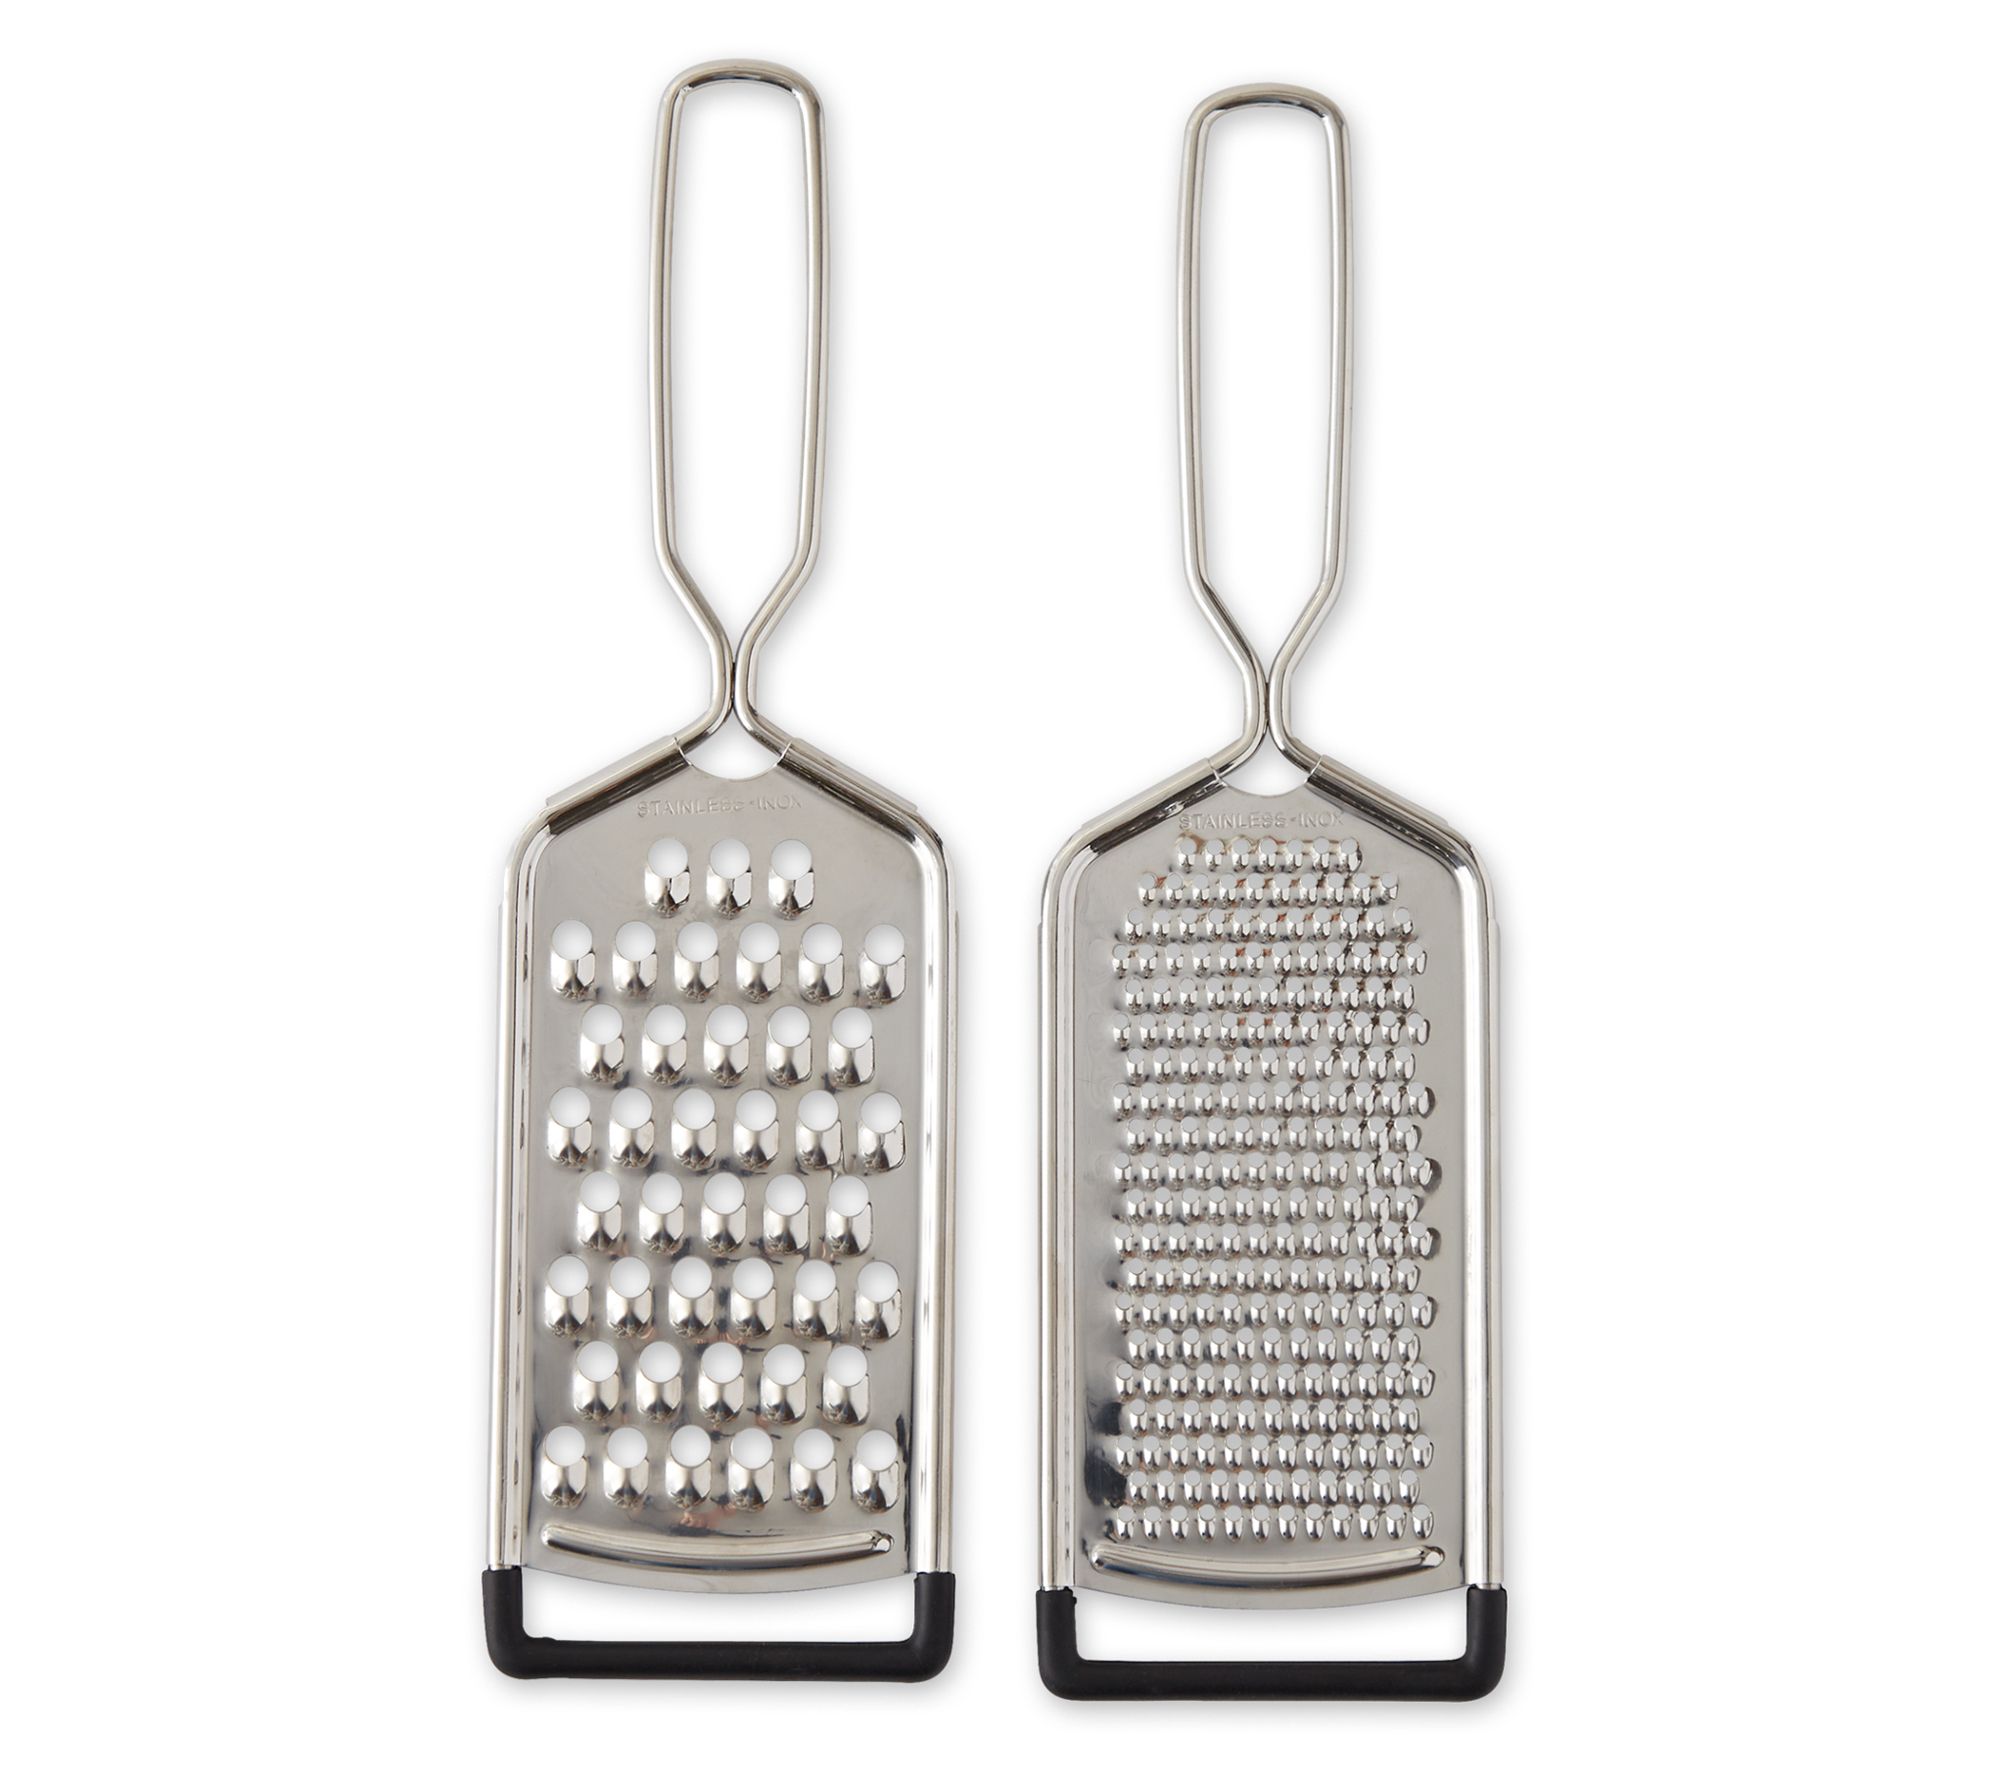 Prepology Handheld Electric Rechargeable Cheese Grater 